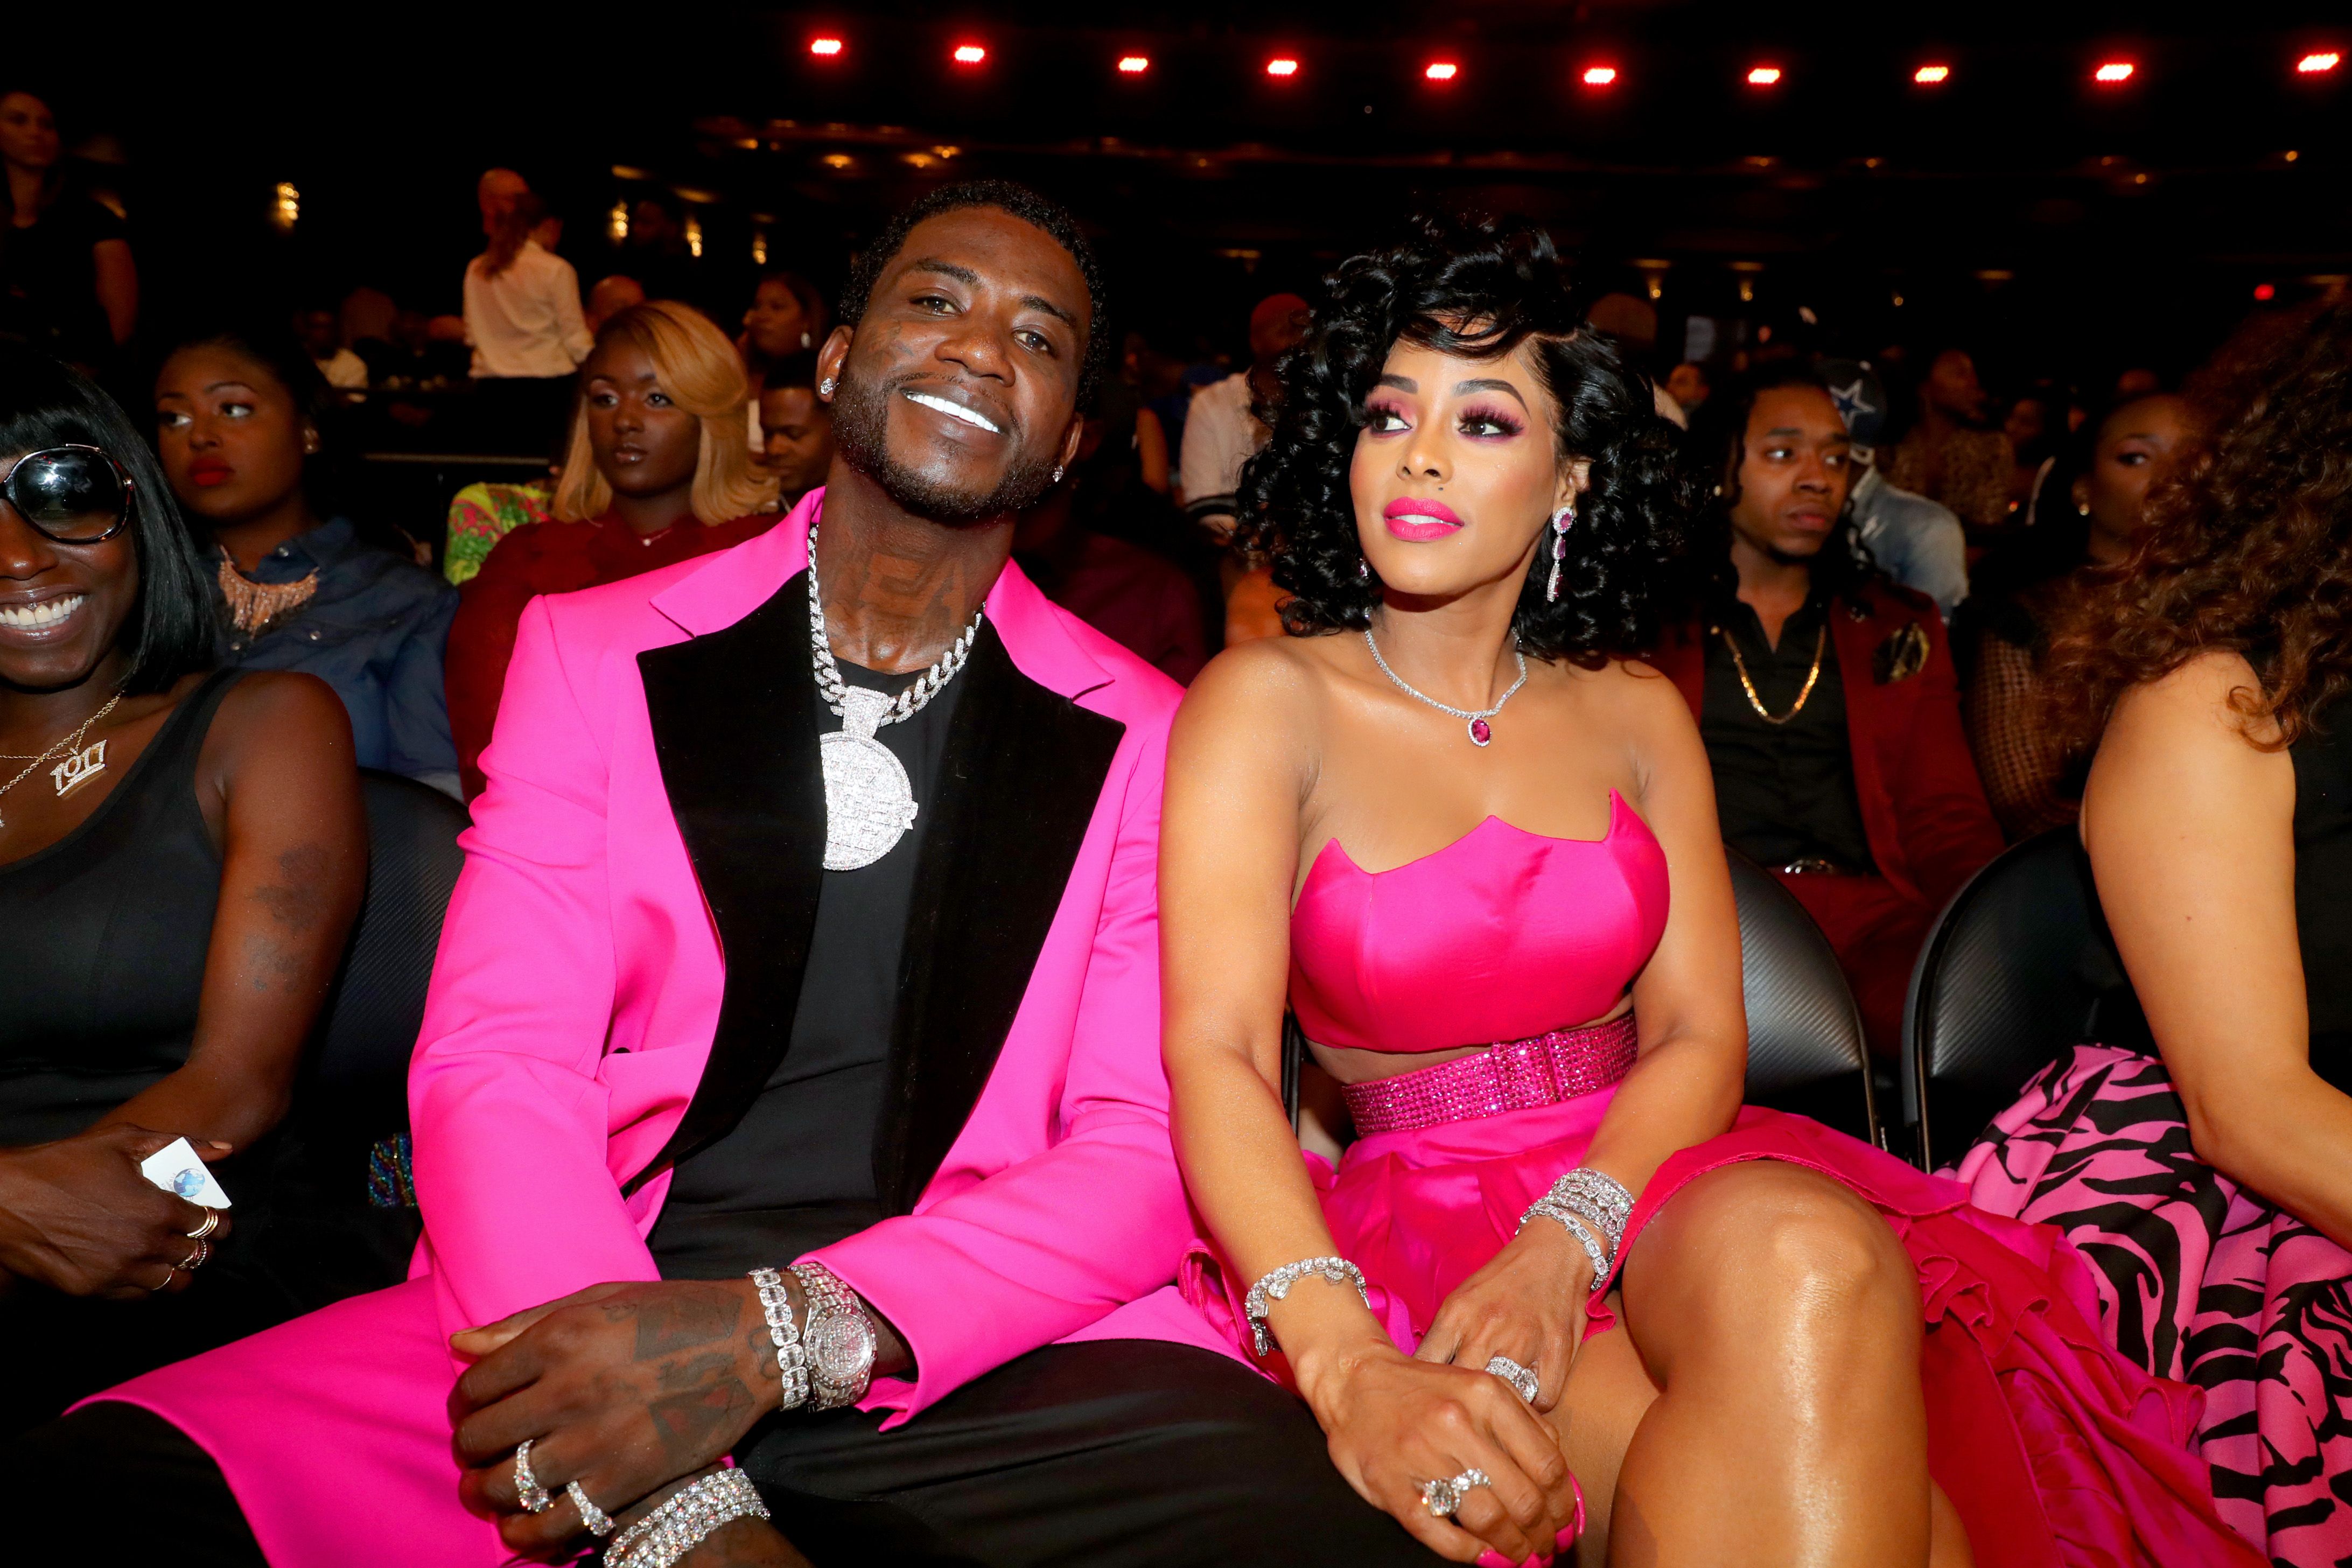 Gucci Mane and Keyshia Ka'oir during the BET Hip Hop Awards 2018 at Fillmore Miami Beach on October 6, 2018 in Miami Beach, Florida. | Photo: Getty Images.